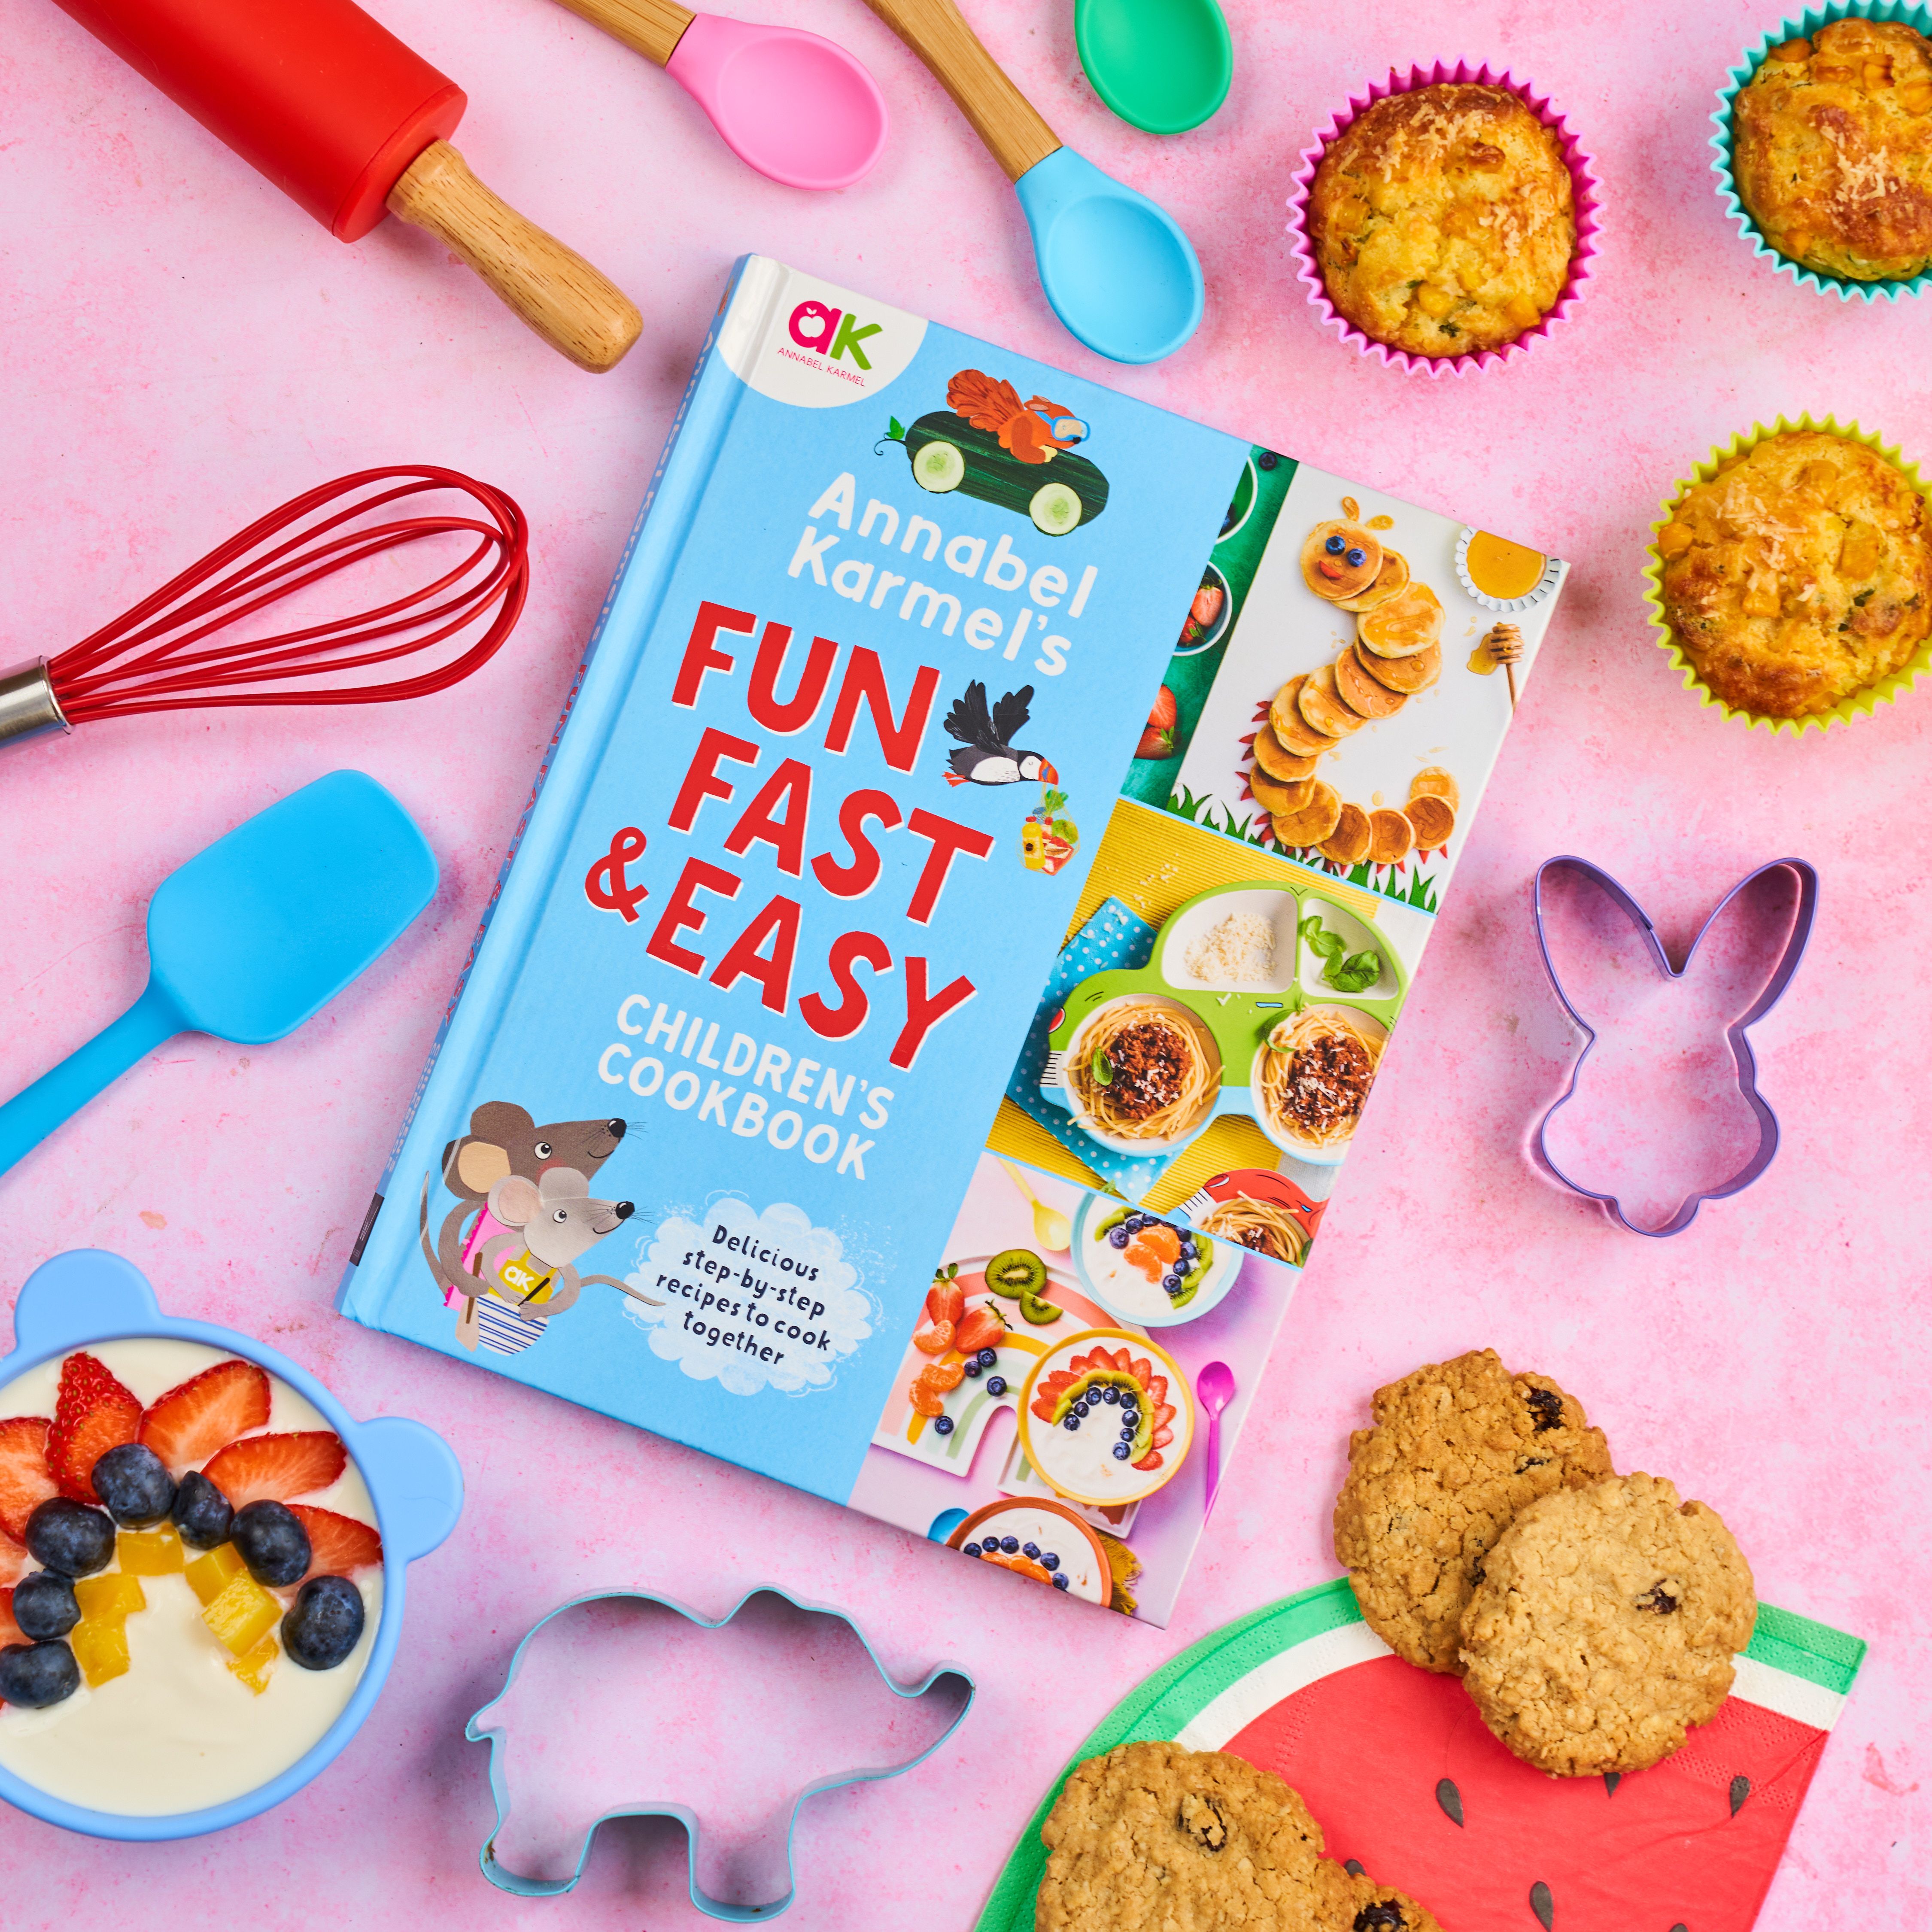 Annabel Karmel and Welbeck Publishing reinvent family cooking with  Annabel Karmel's Fun, Fast and Easy Children's Cookbook.